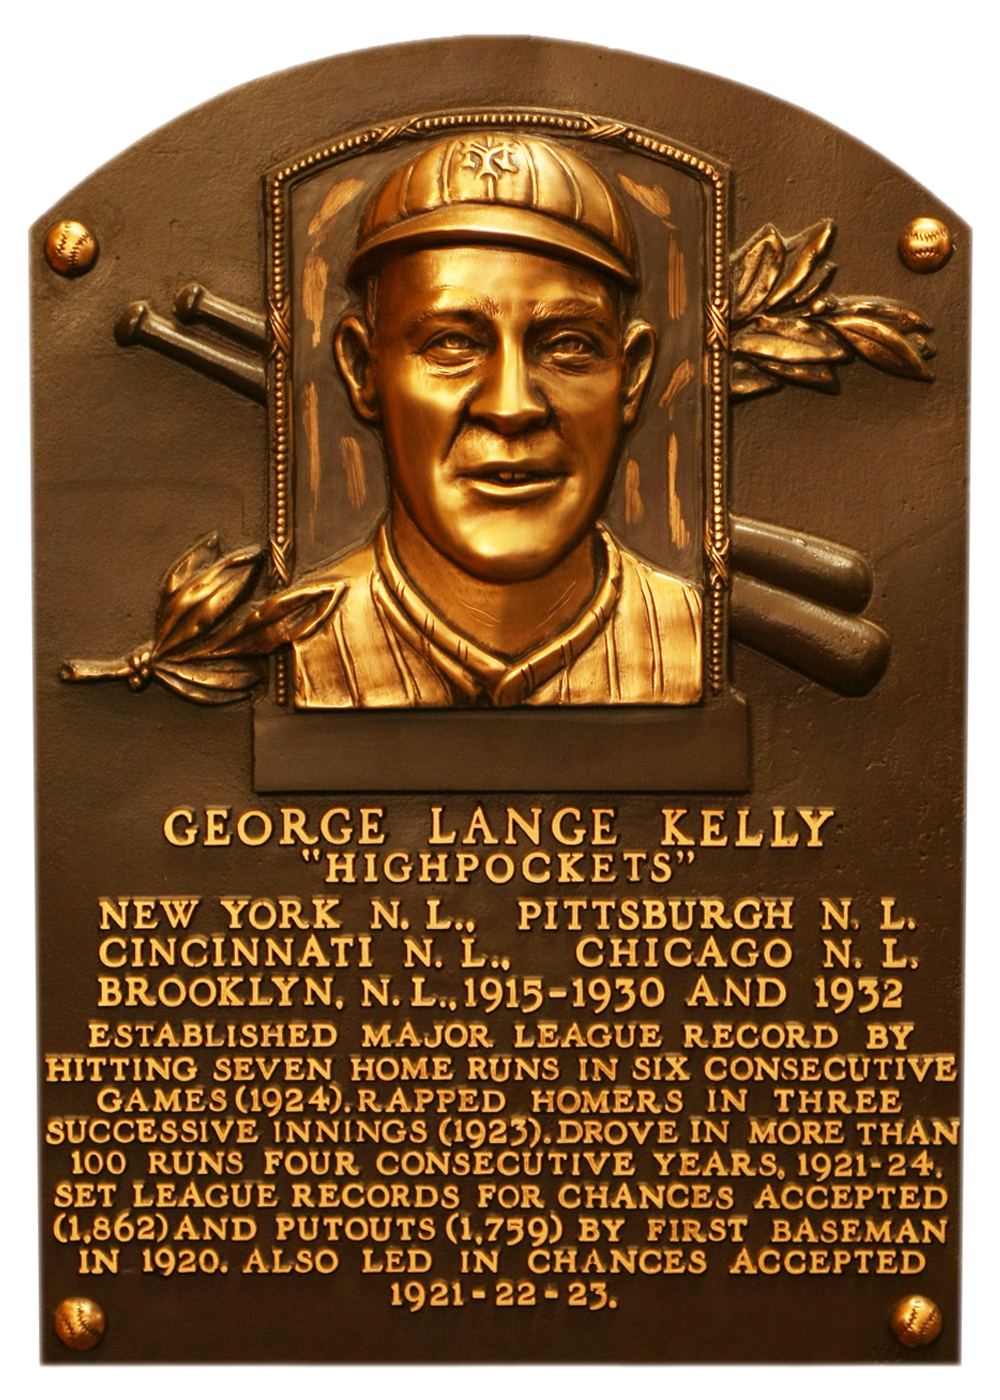 George Kelly Hall of Fame plaque